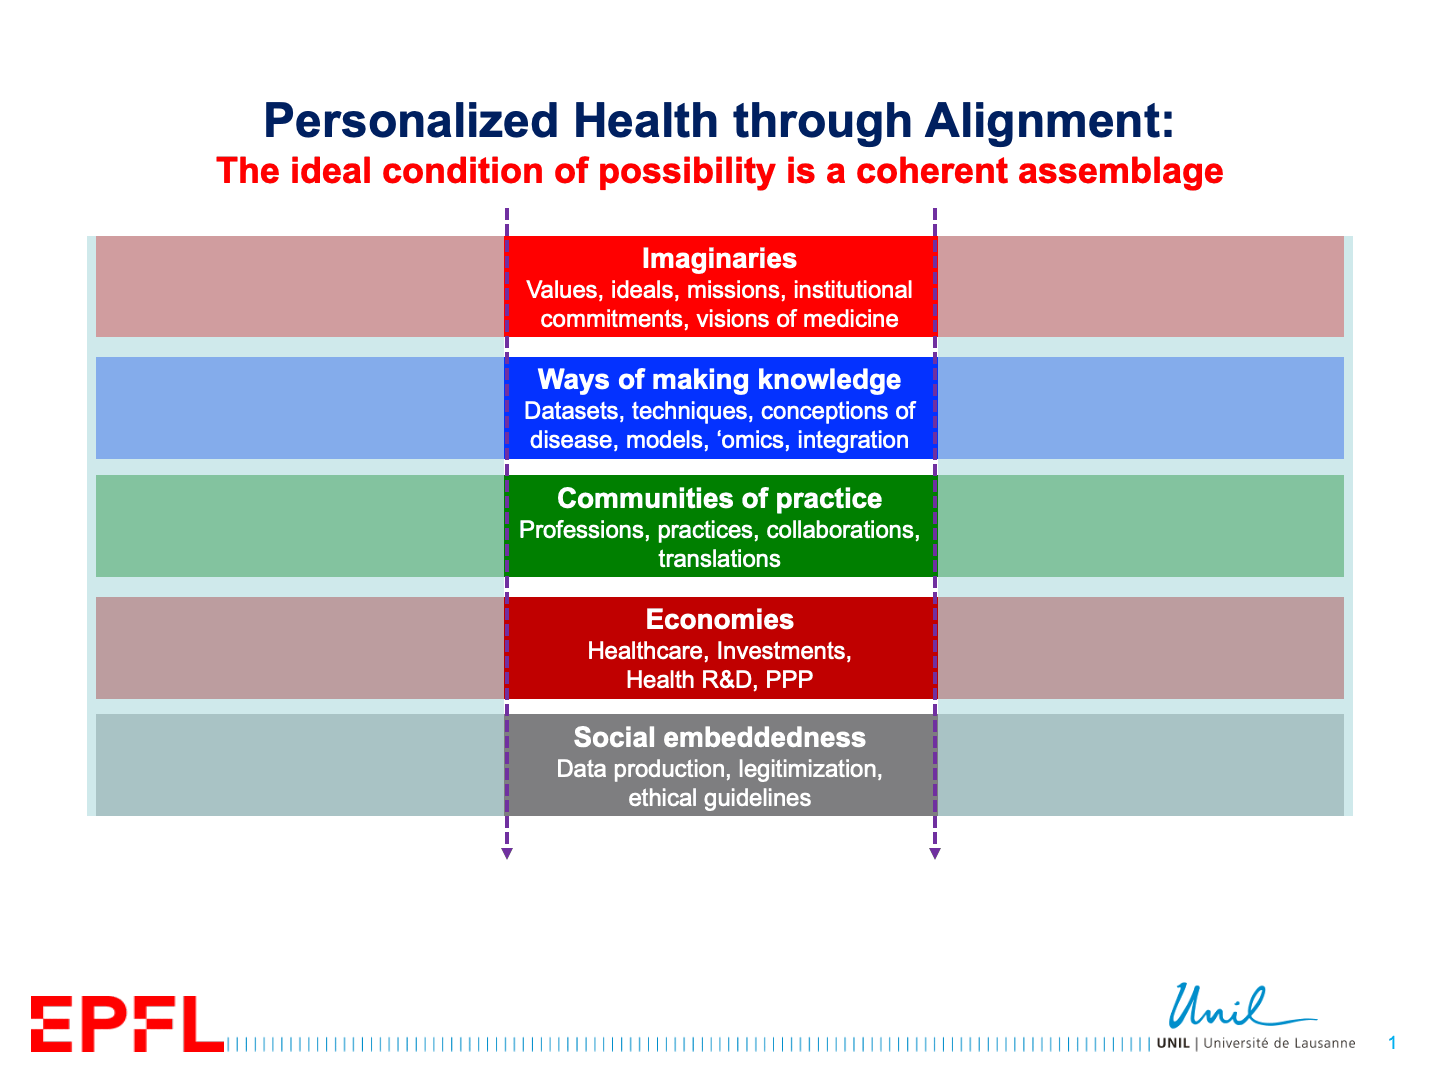 The STS concept of 'alignment' is central to the course